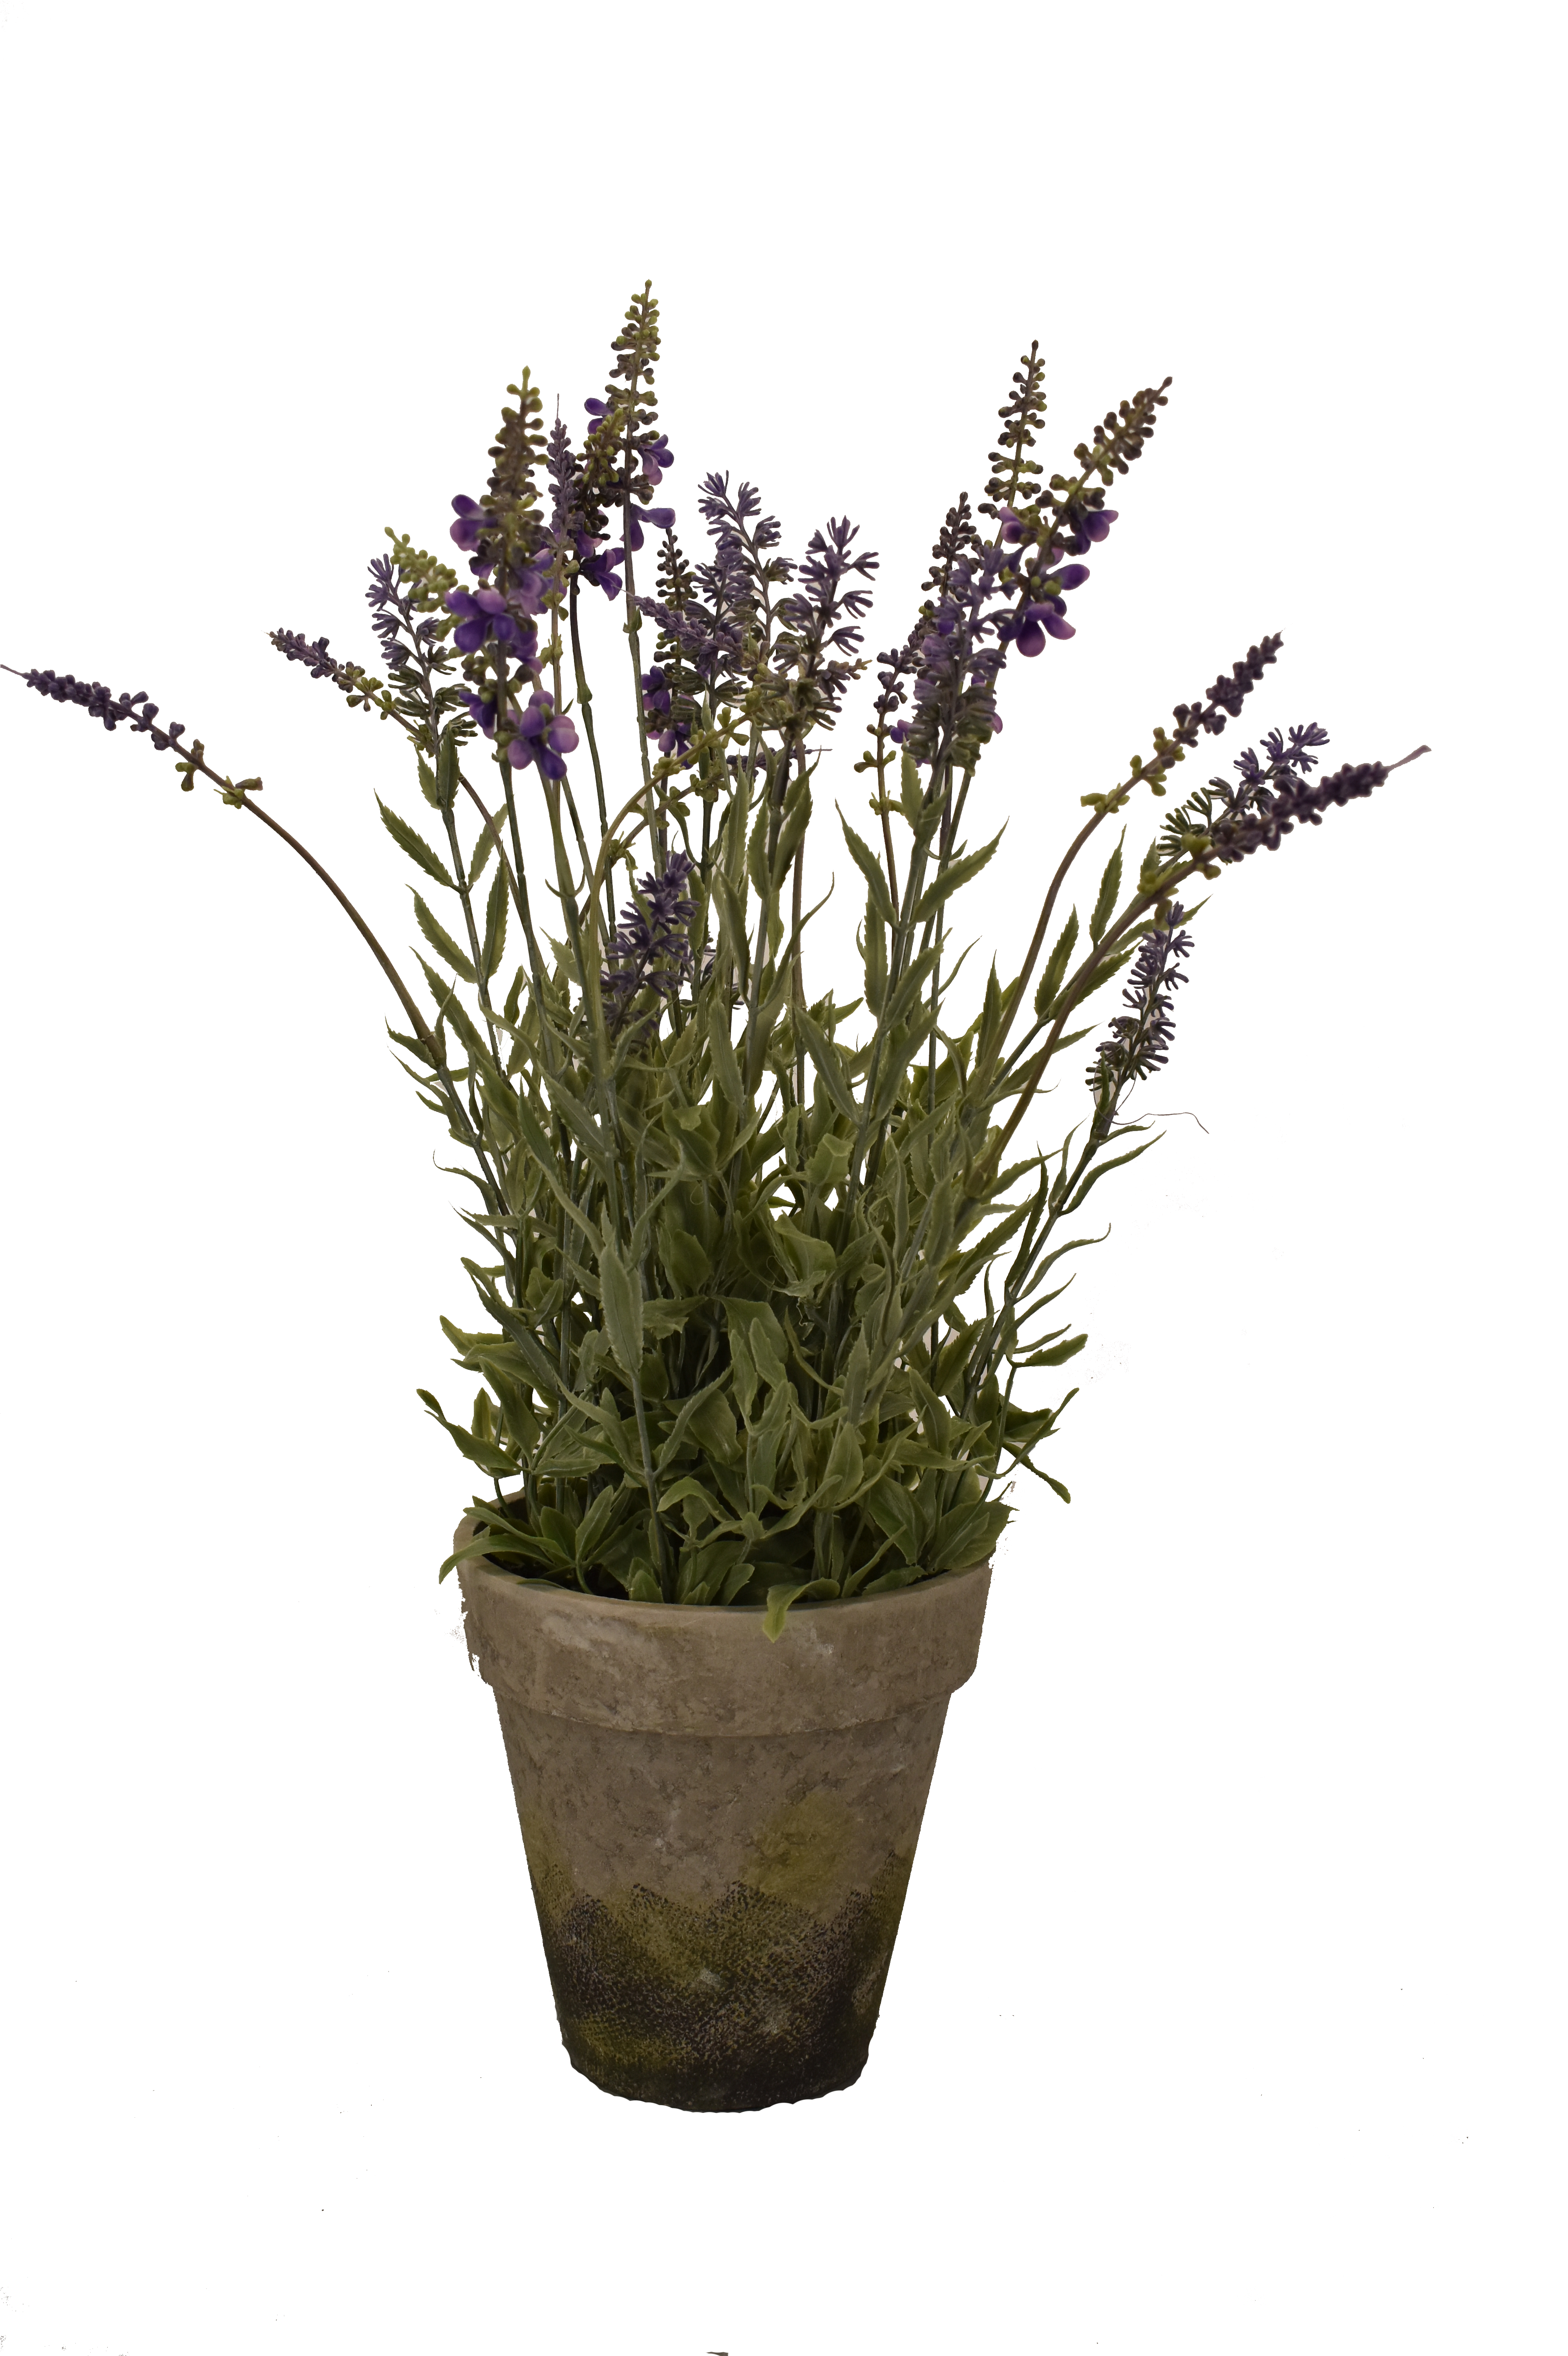 A Potted Plant With Purple Flowers